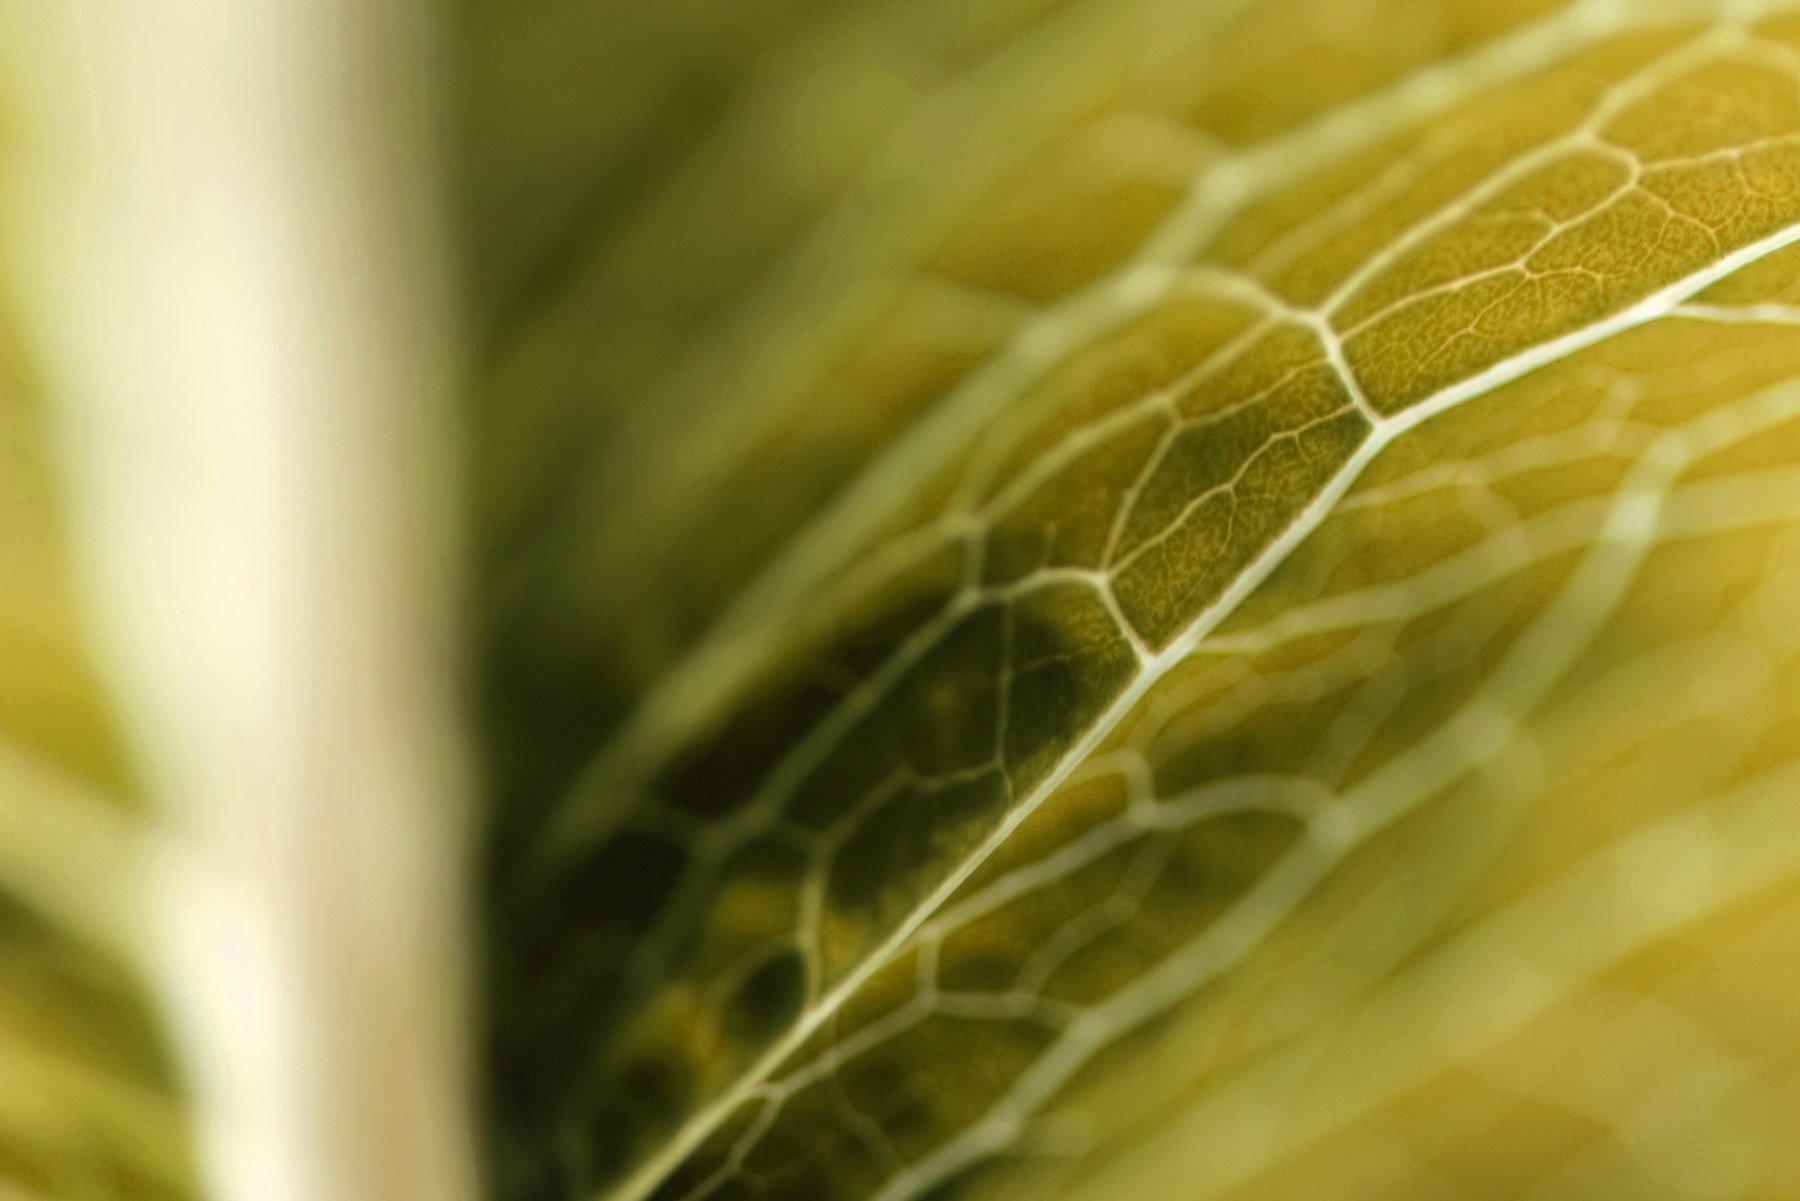 ETP 2014 cover photo of a golden leaf close up